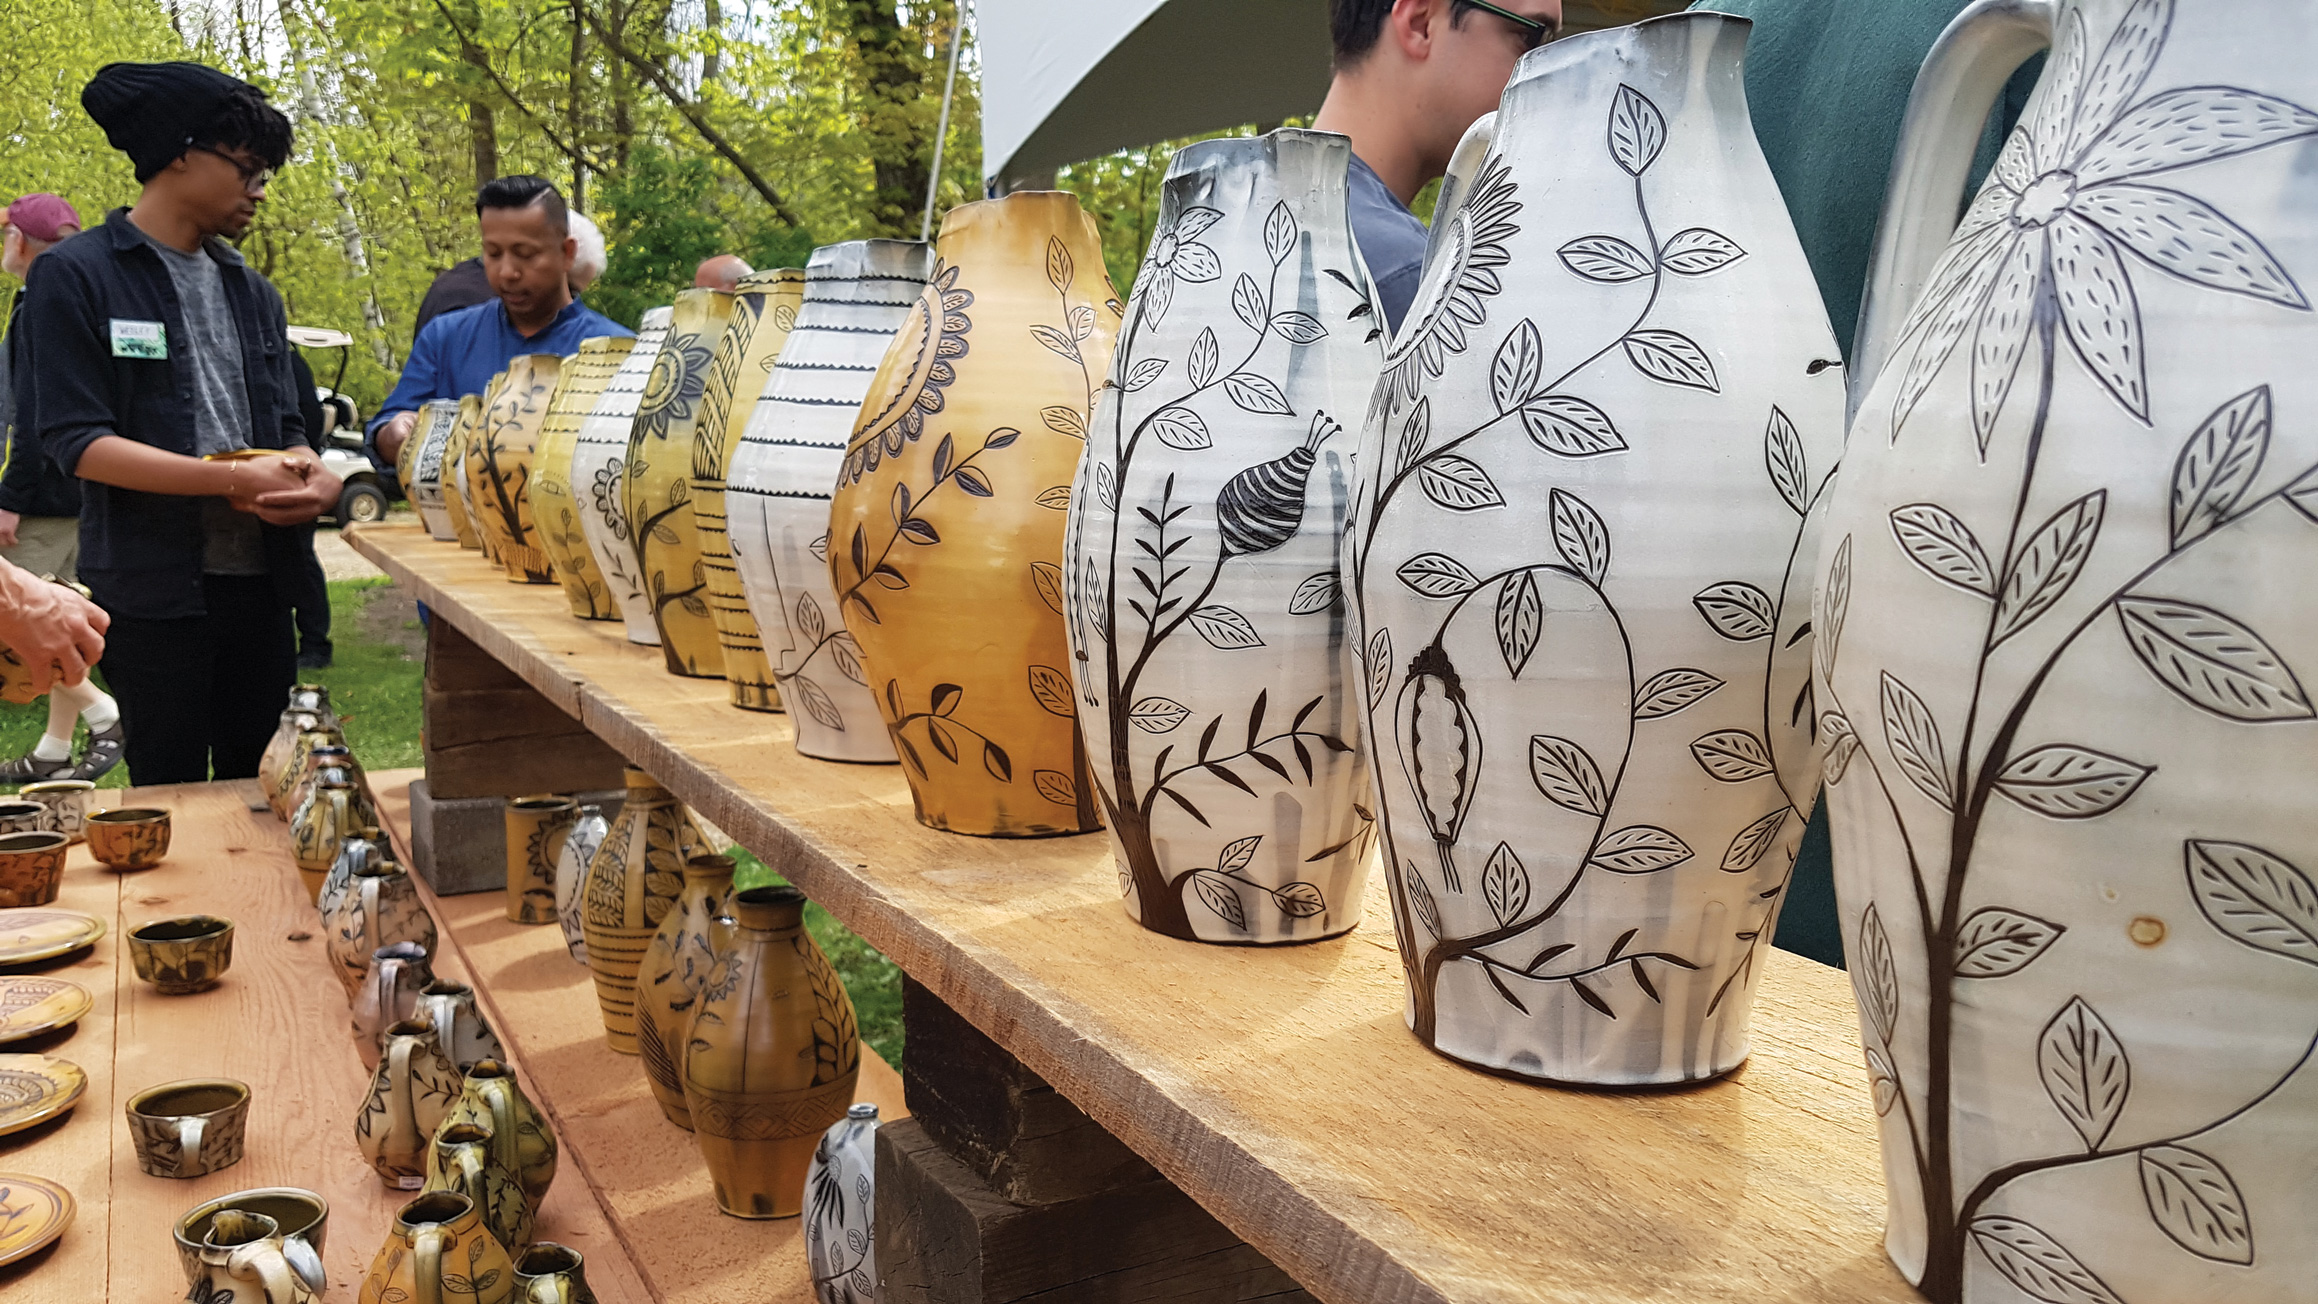 Matthew Metz pots at home of Will Swanson, 2017 St. Croix Pottery Tour. Photograph by Elenor Wilson.